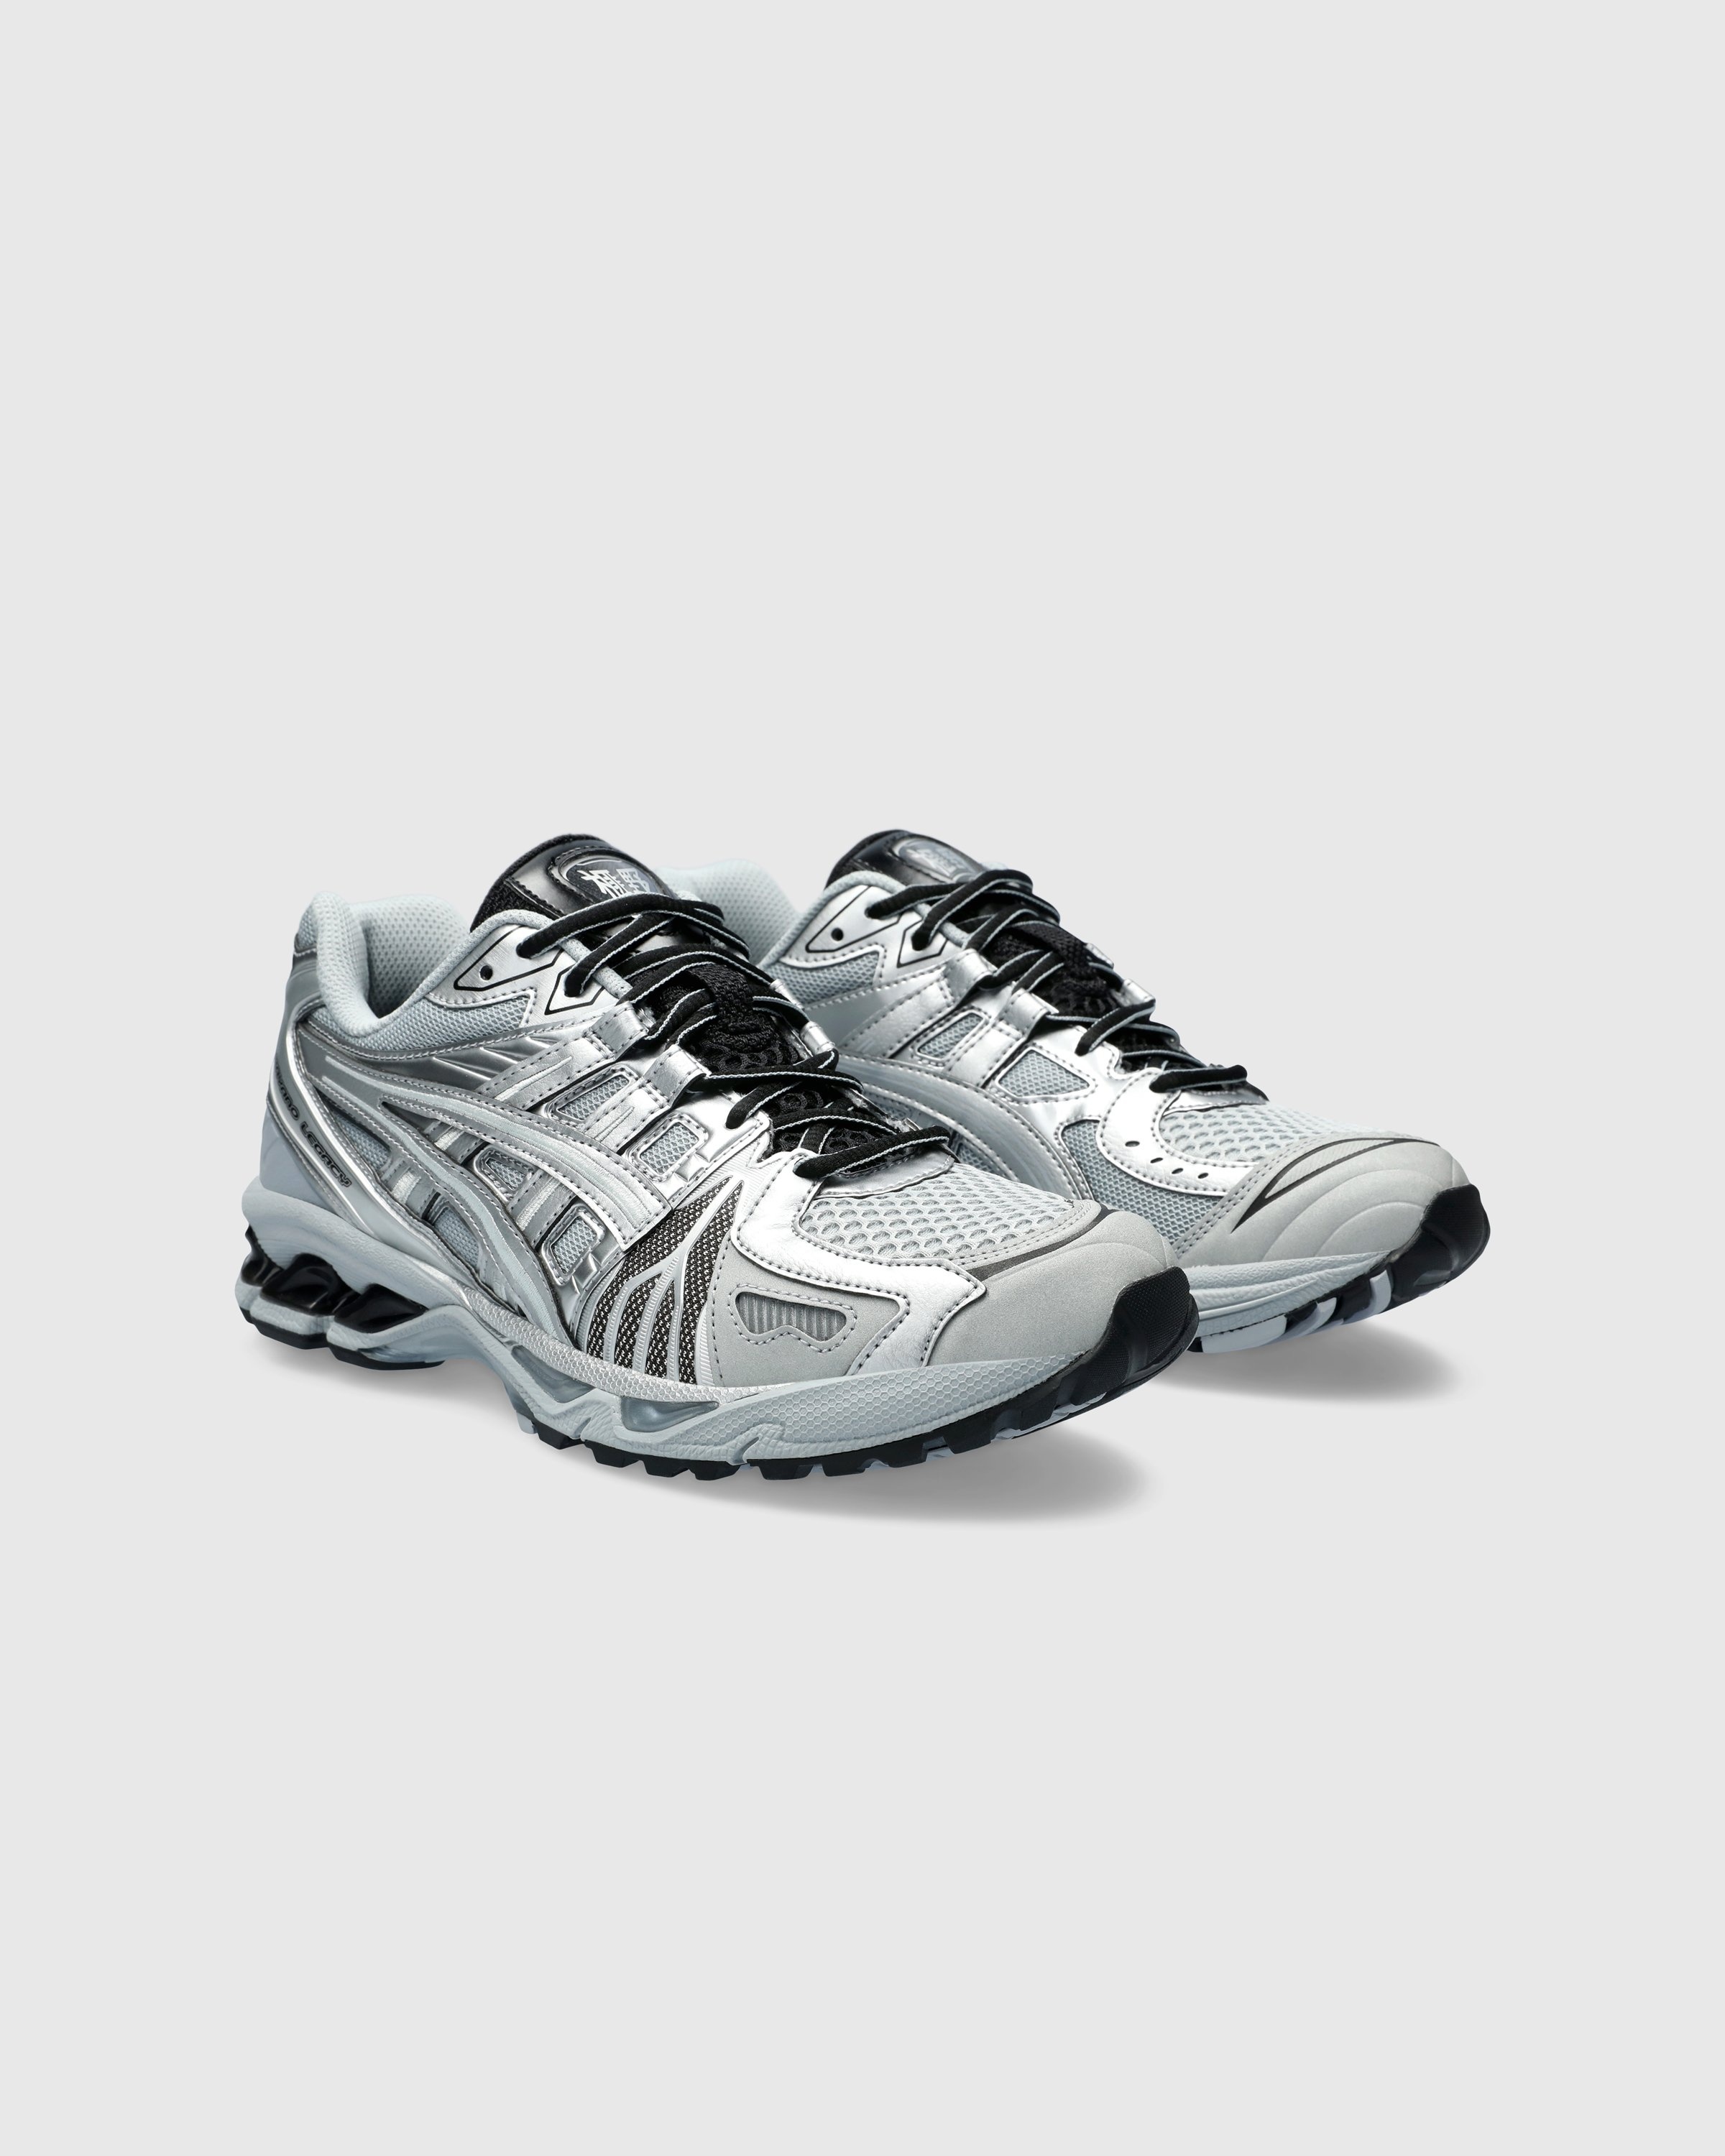 asics – GEL-KAYANO LEGACY Pure Silver - Sneakers - Silver - Image 3